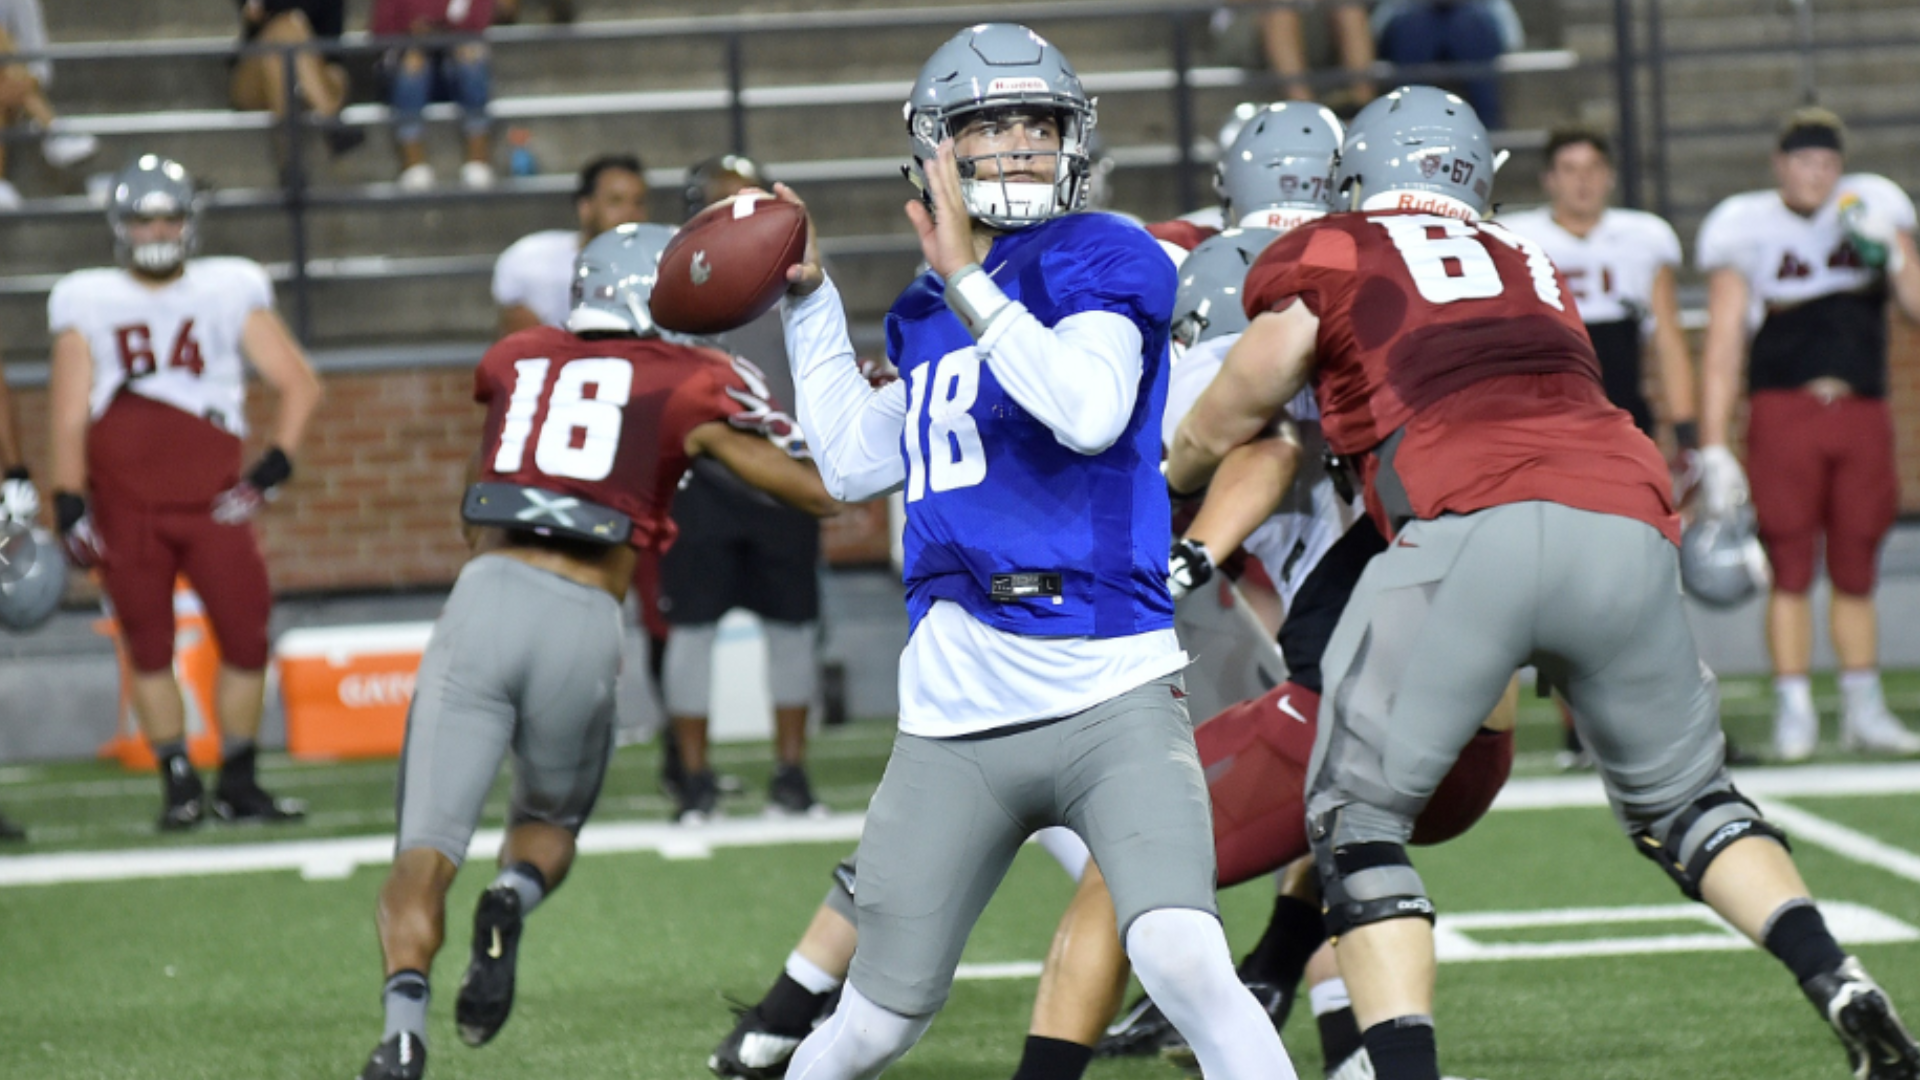 The Wazzu quarterback appears to currently be the front runner in the quarterback battle.